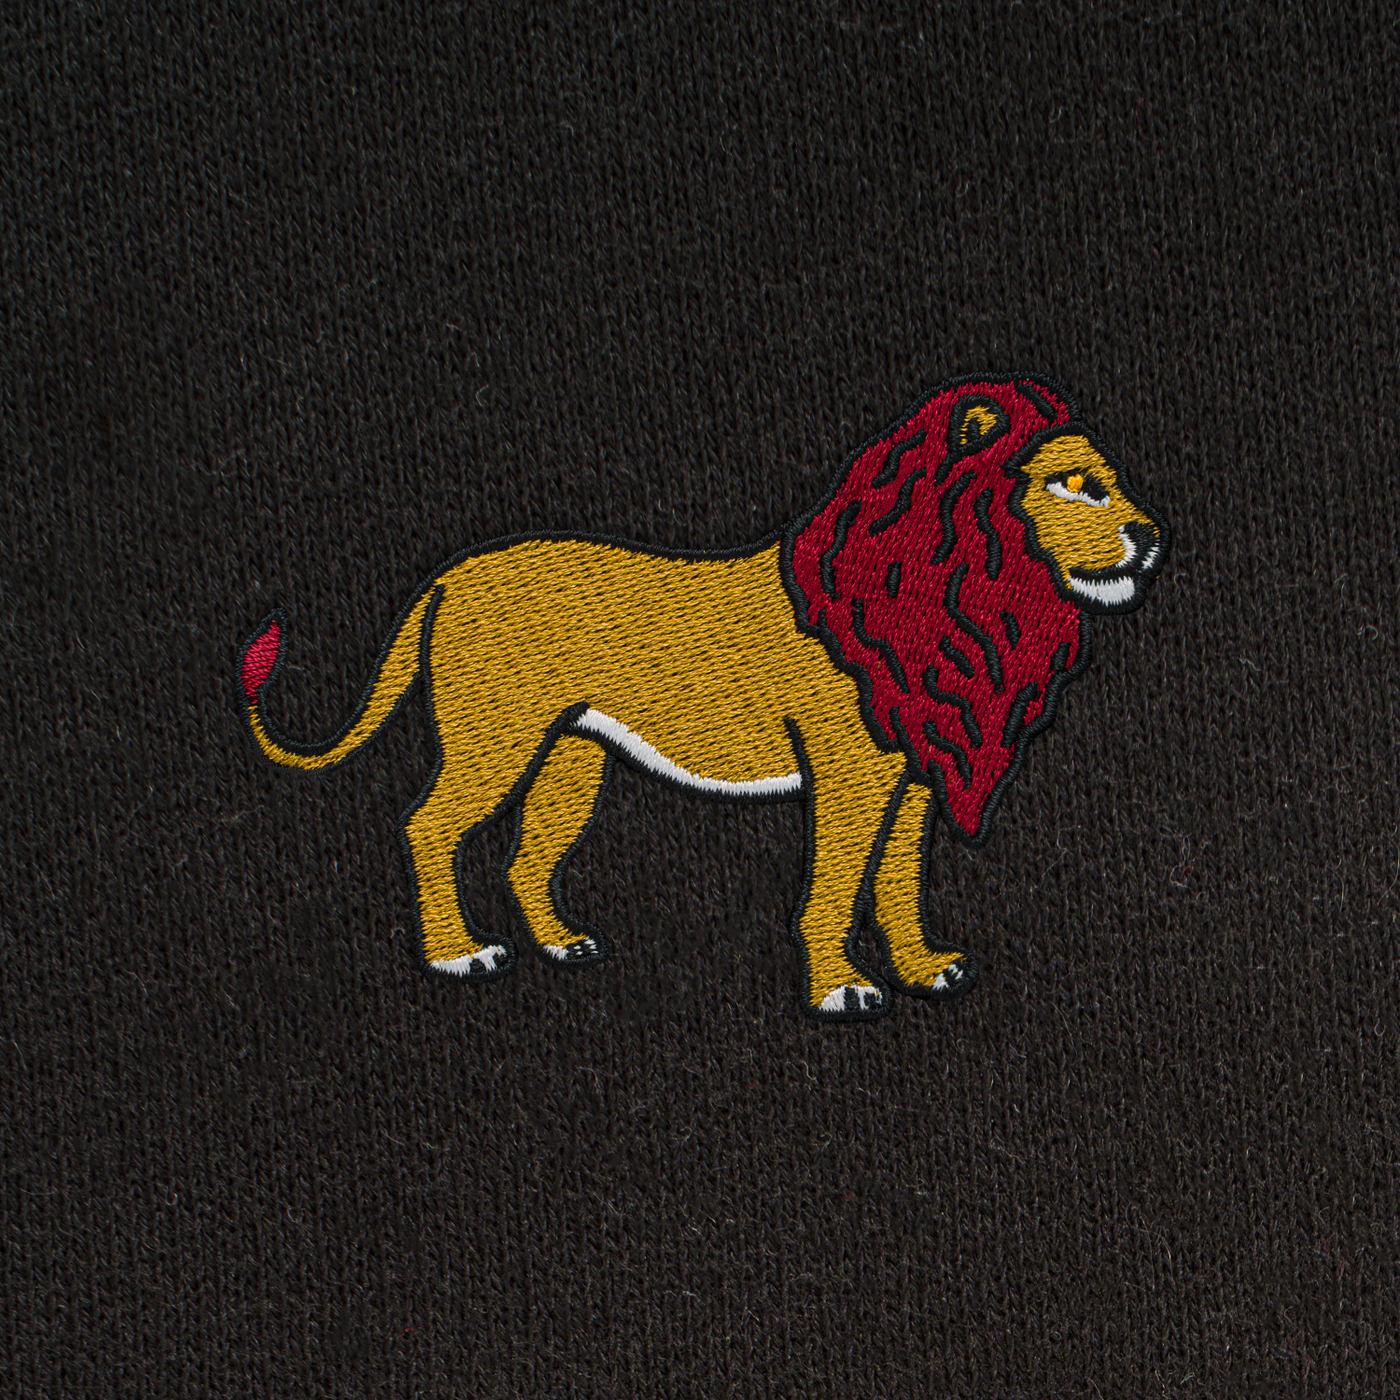 Bobby's Planet Men's Embroidered Lion Shorts from African Animals Collection in Black Color#color_black